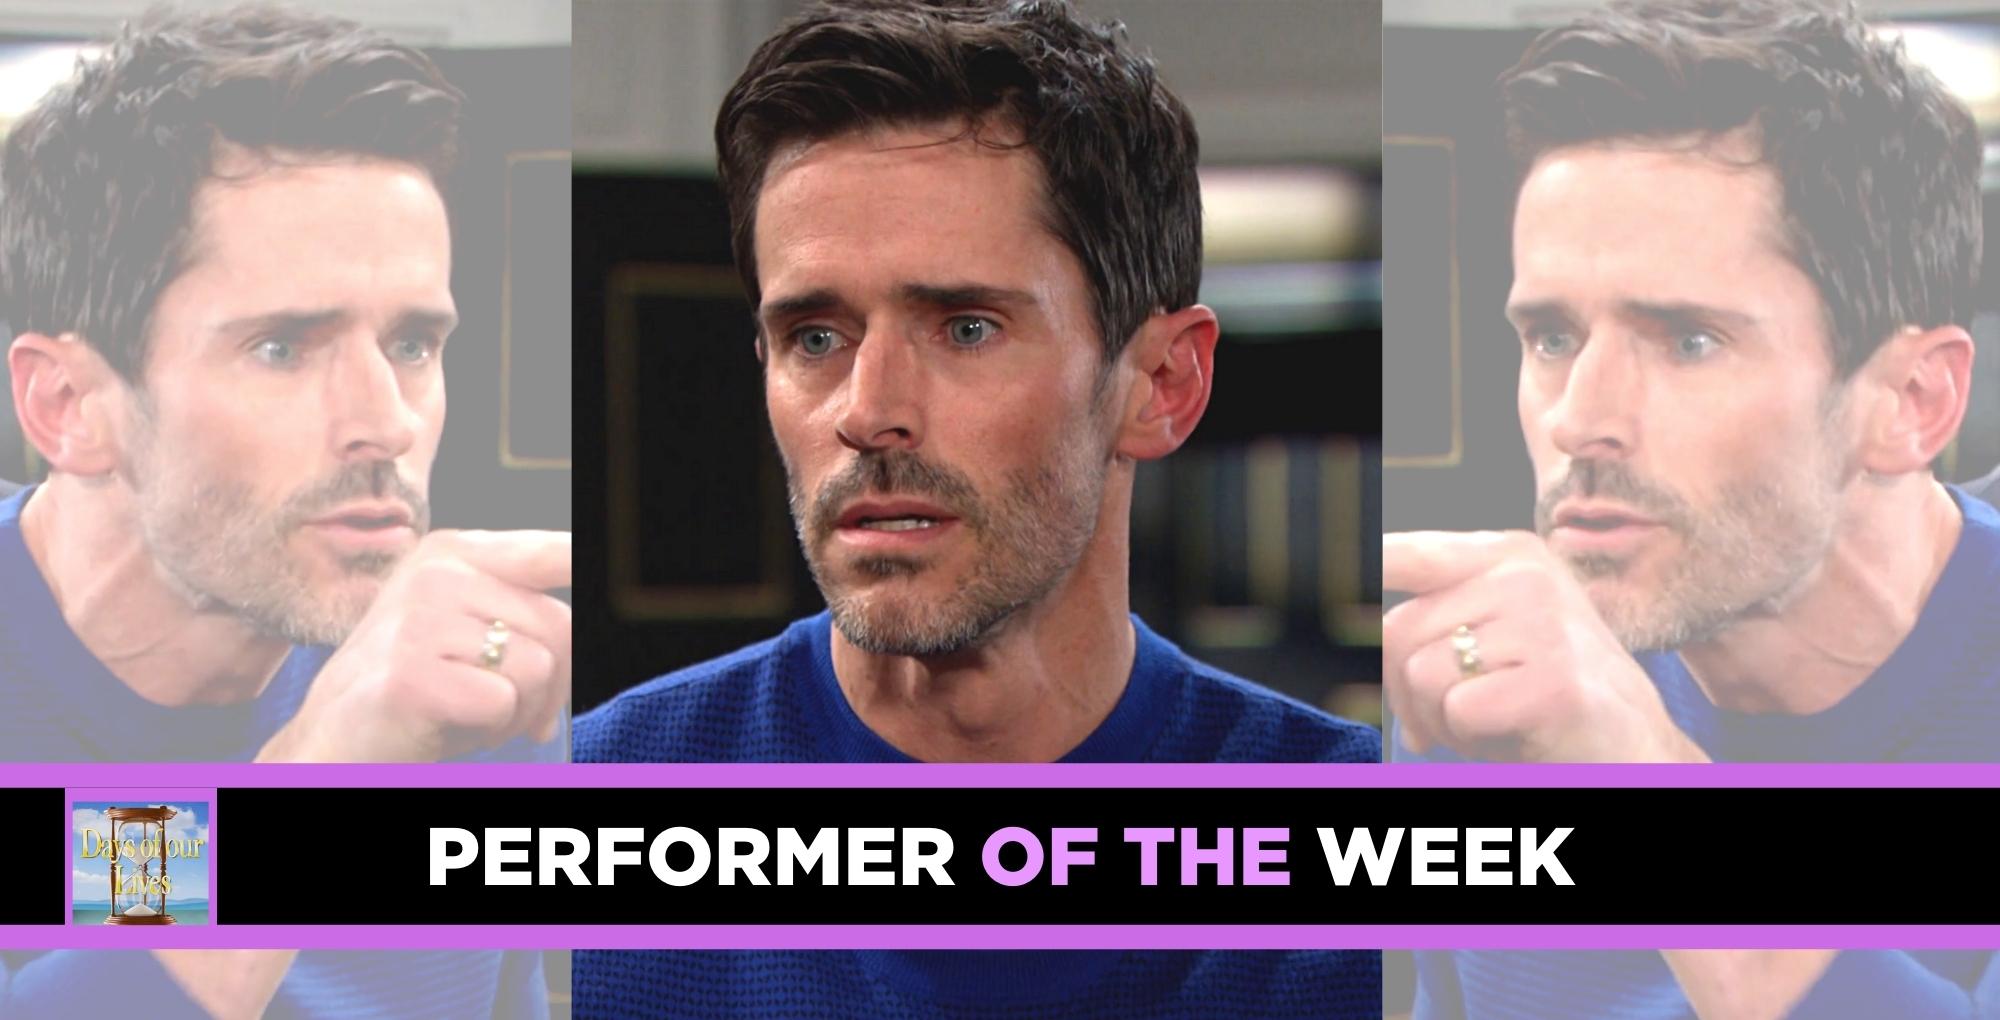 brandon beemer the days of our lives performer of the week.